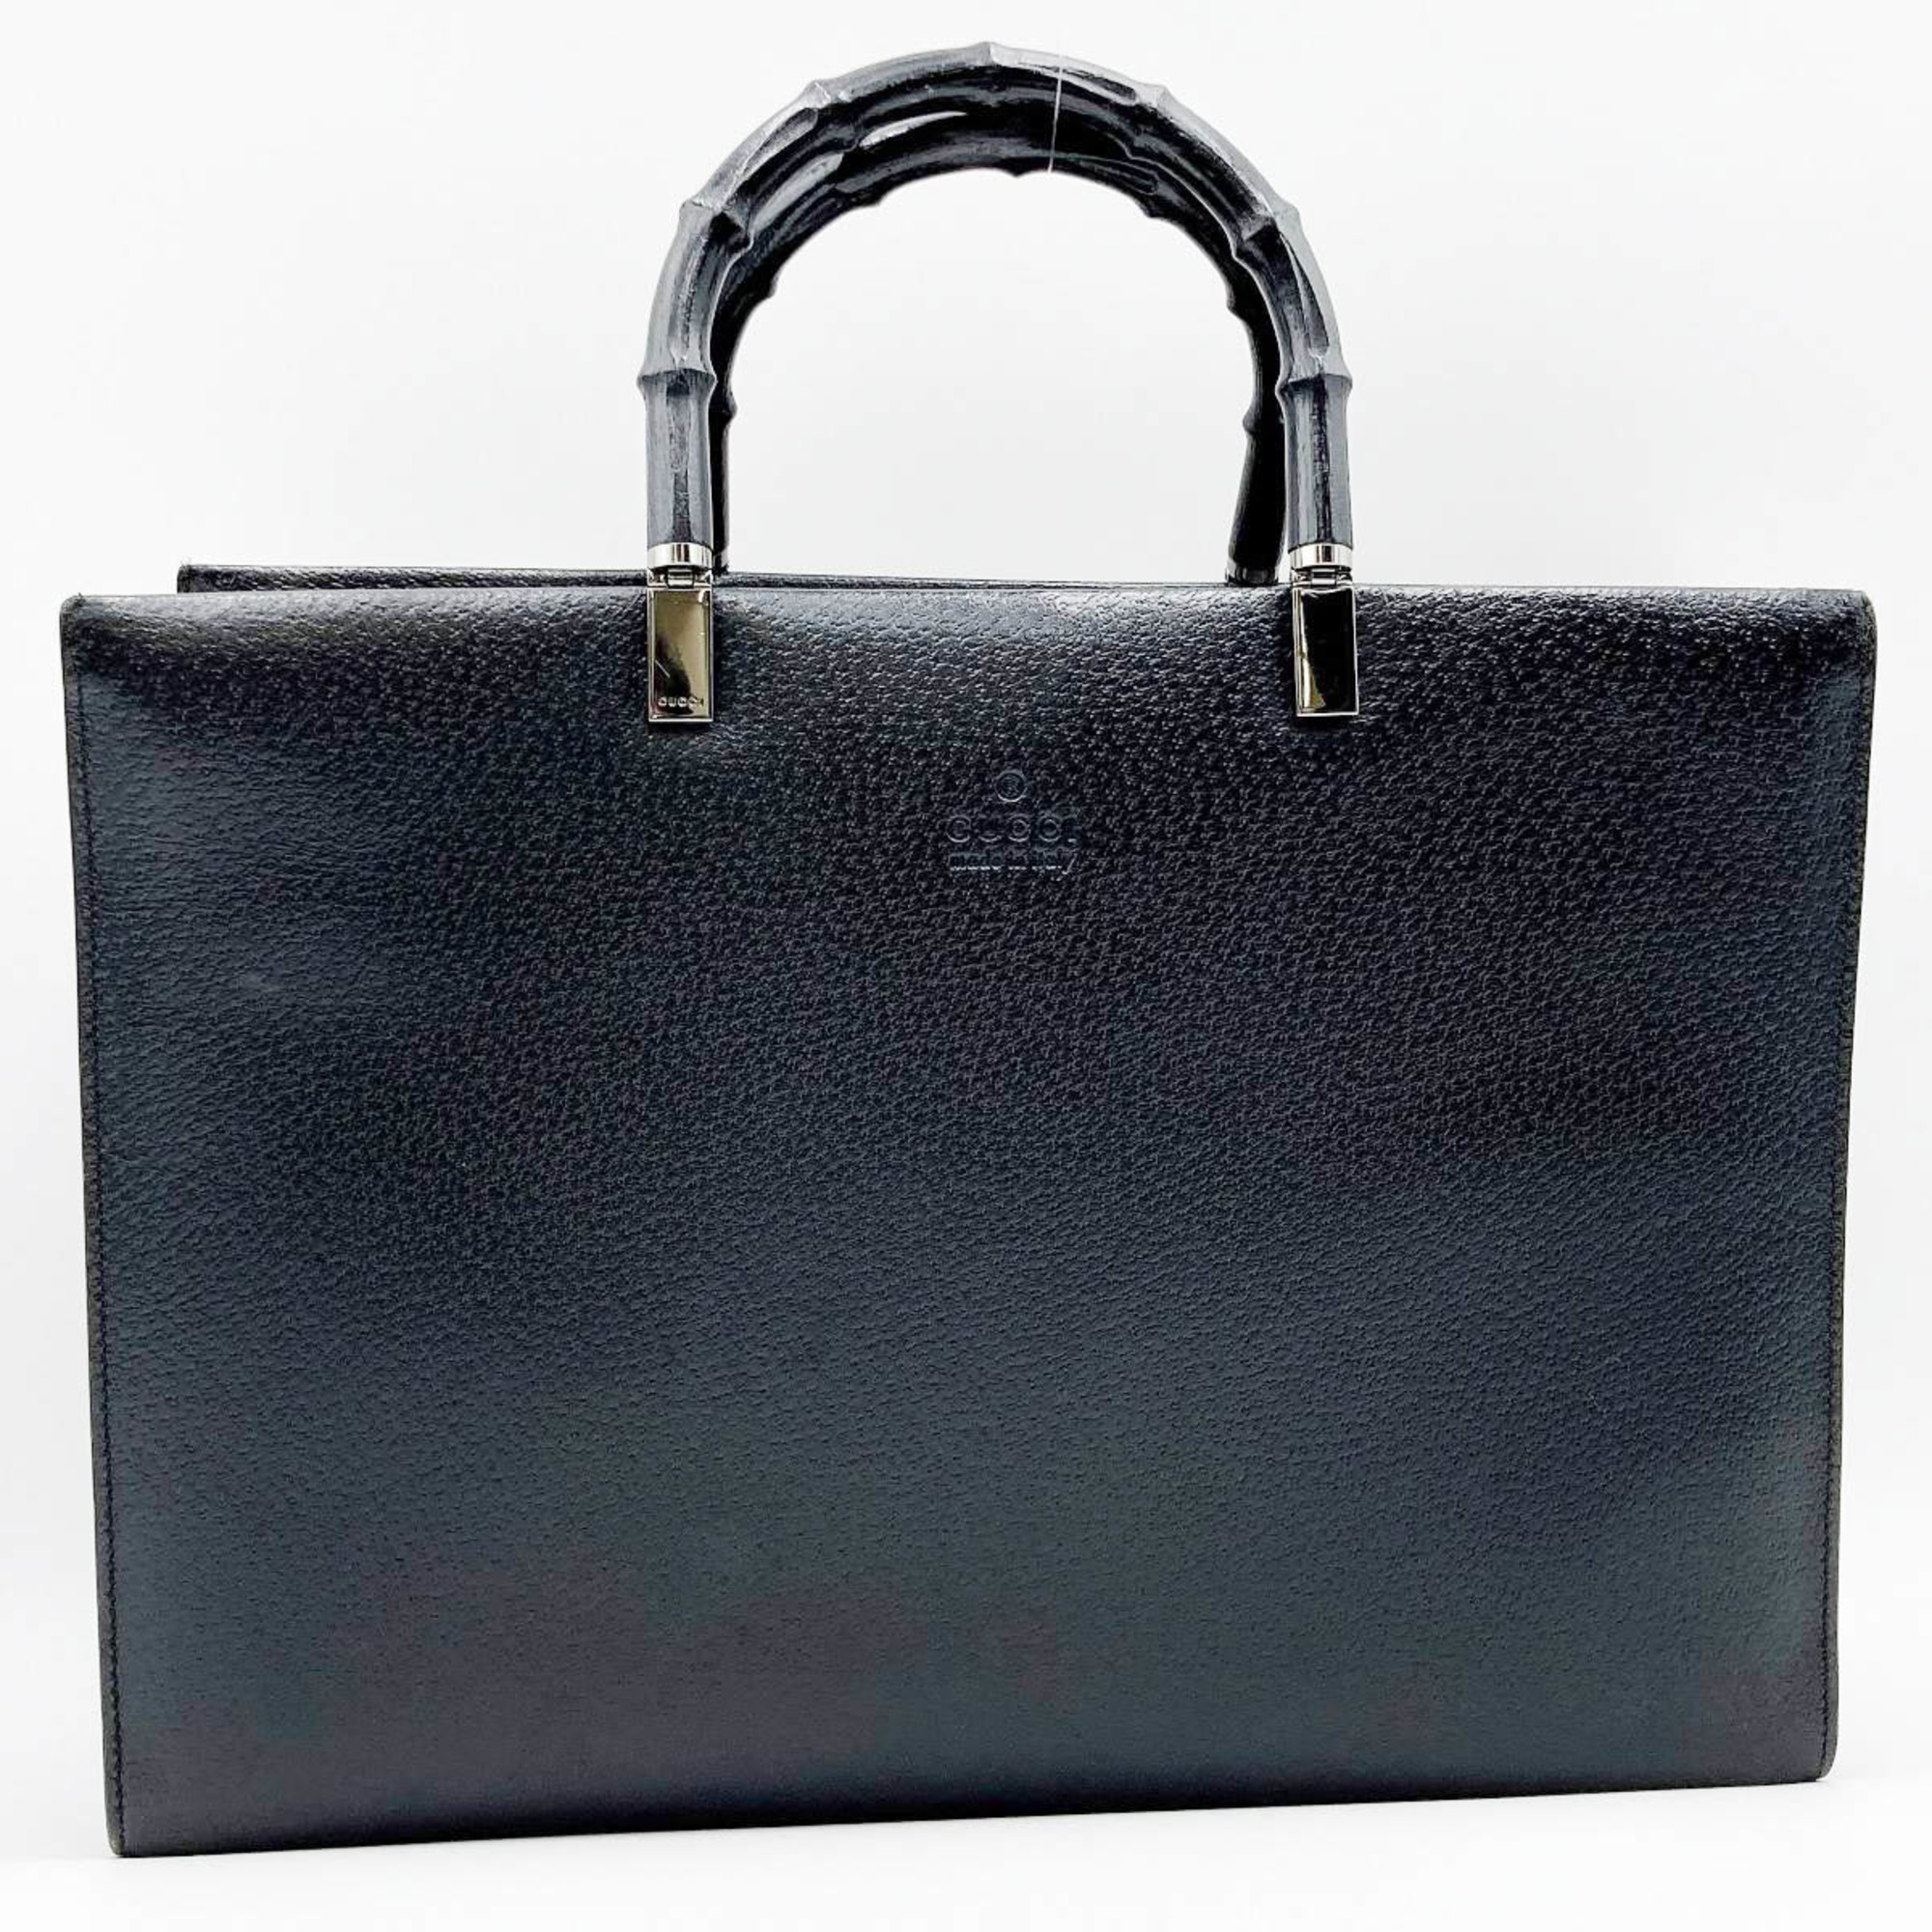 GUCCI 2WAY Bamboo Business Bag Tote Pigskin Leather Black Women's Men's 002/1034